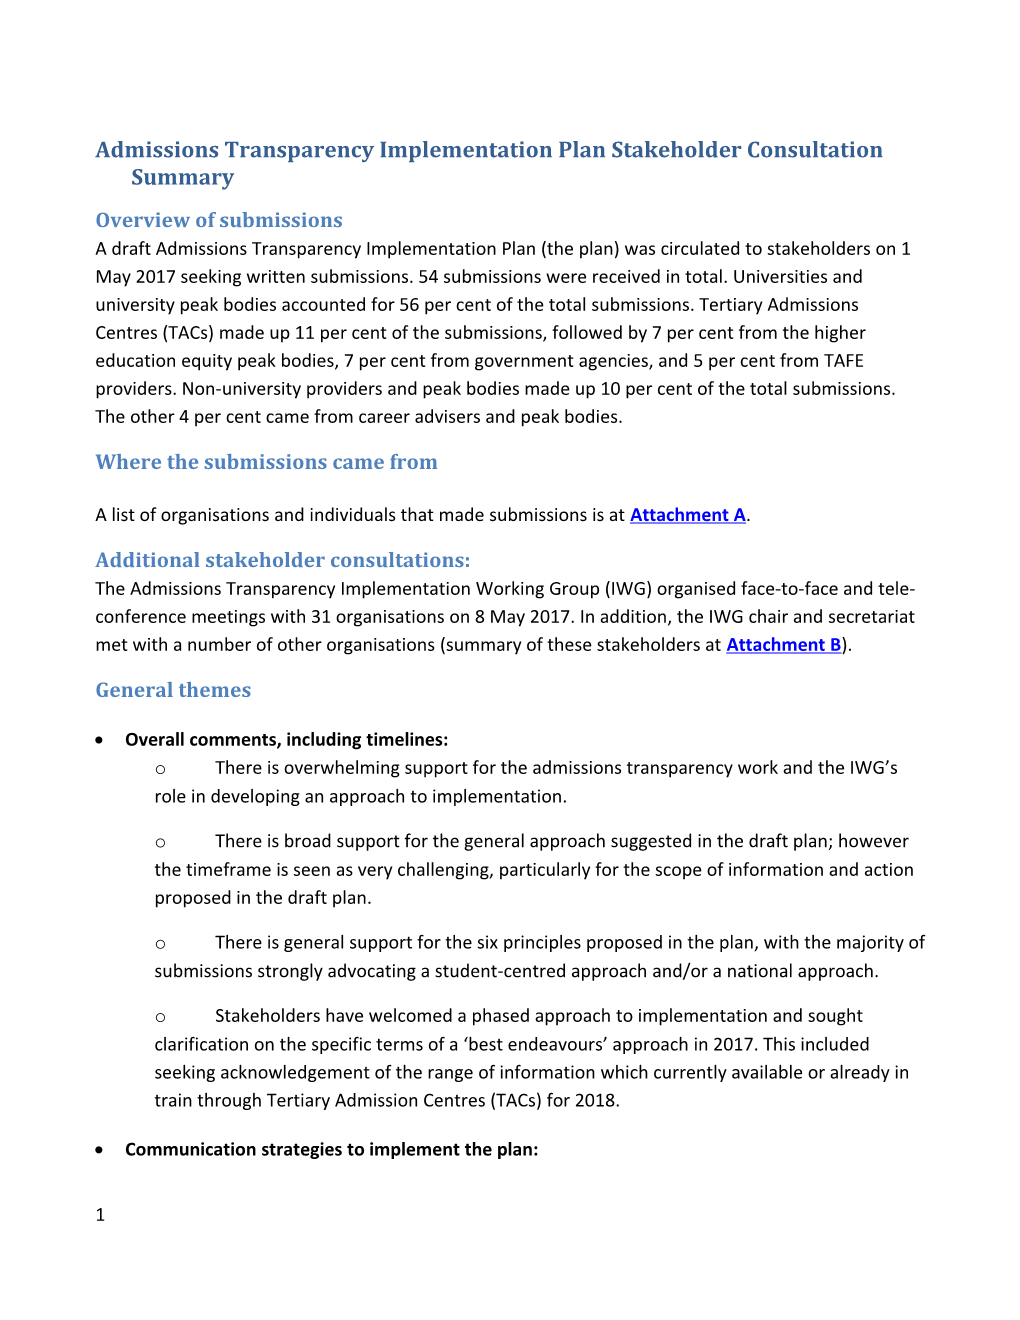 Admissions Transparency Implementation Plan Stakeholder Consultation Summary